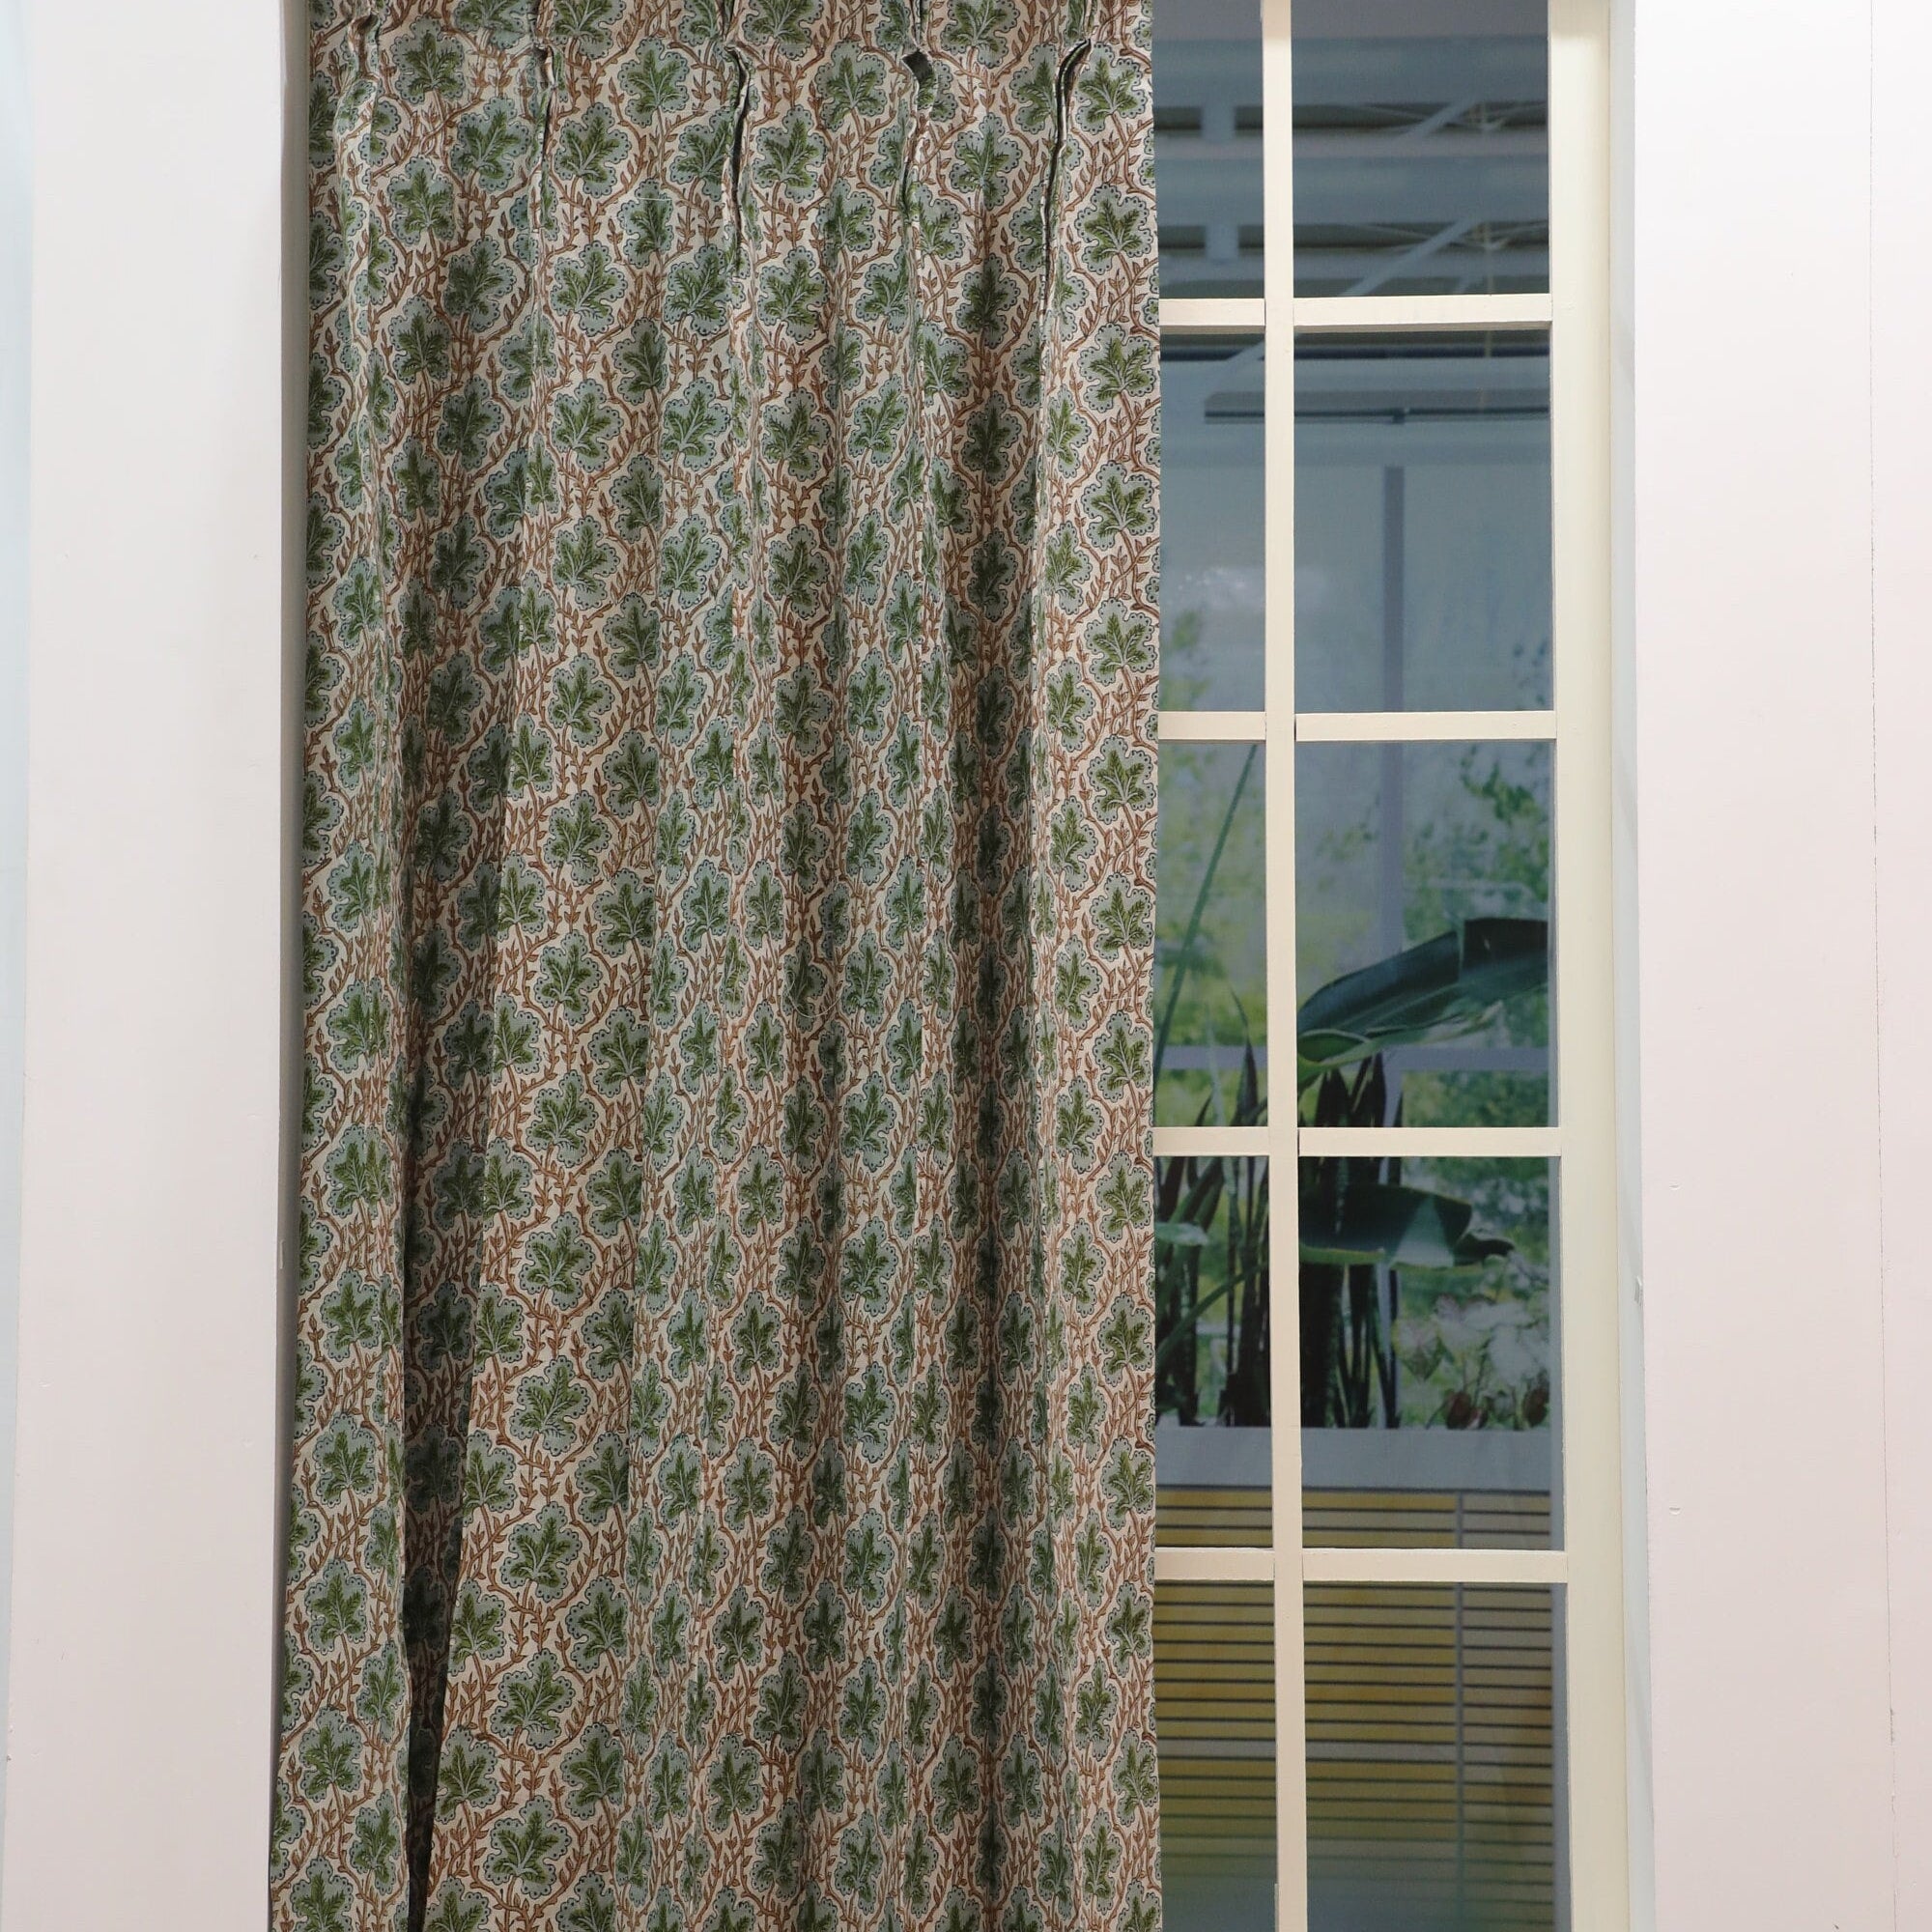 Door Curtains, Block Print Plated Curtains, Window Shades, Curtains Panel, Fabric for Valance and treatments - PUSHP SAMHITA